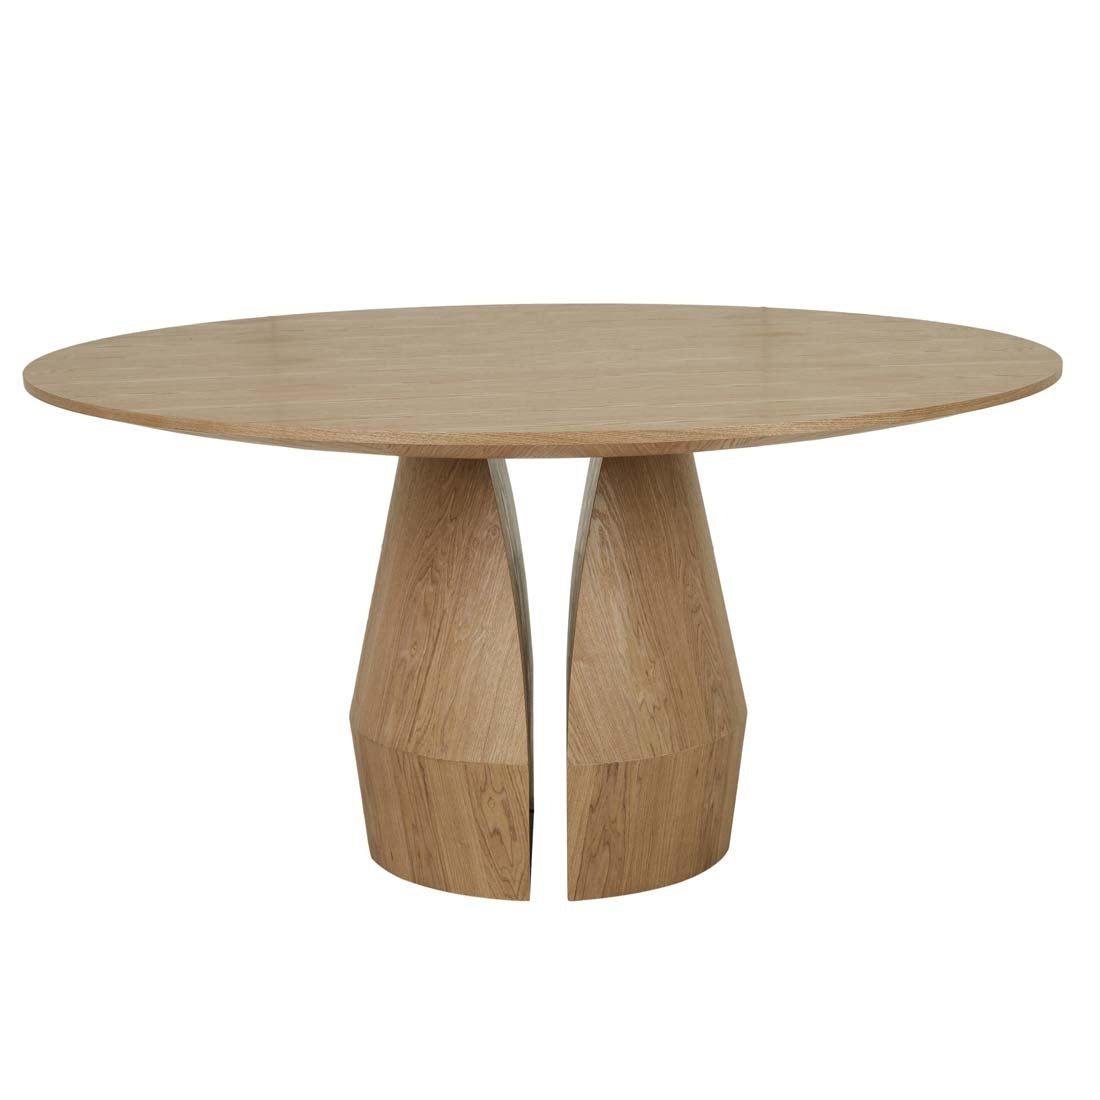 Bloom Dining Table - Natural Ash